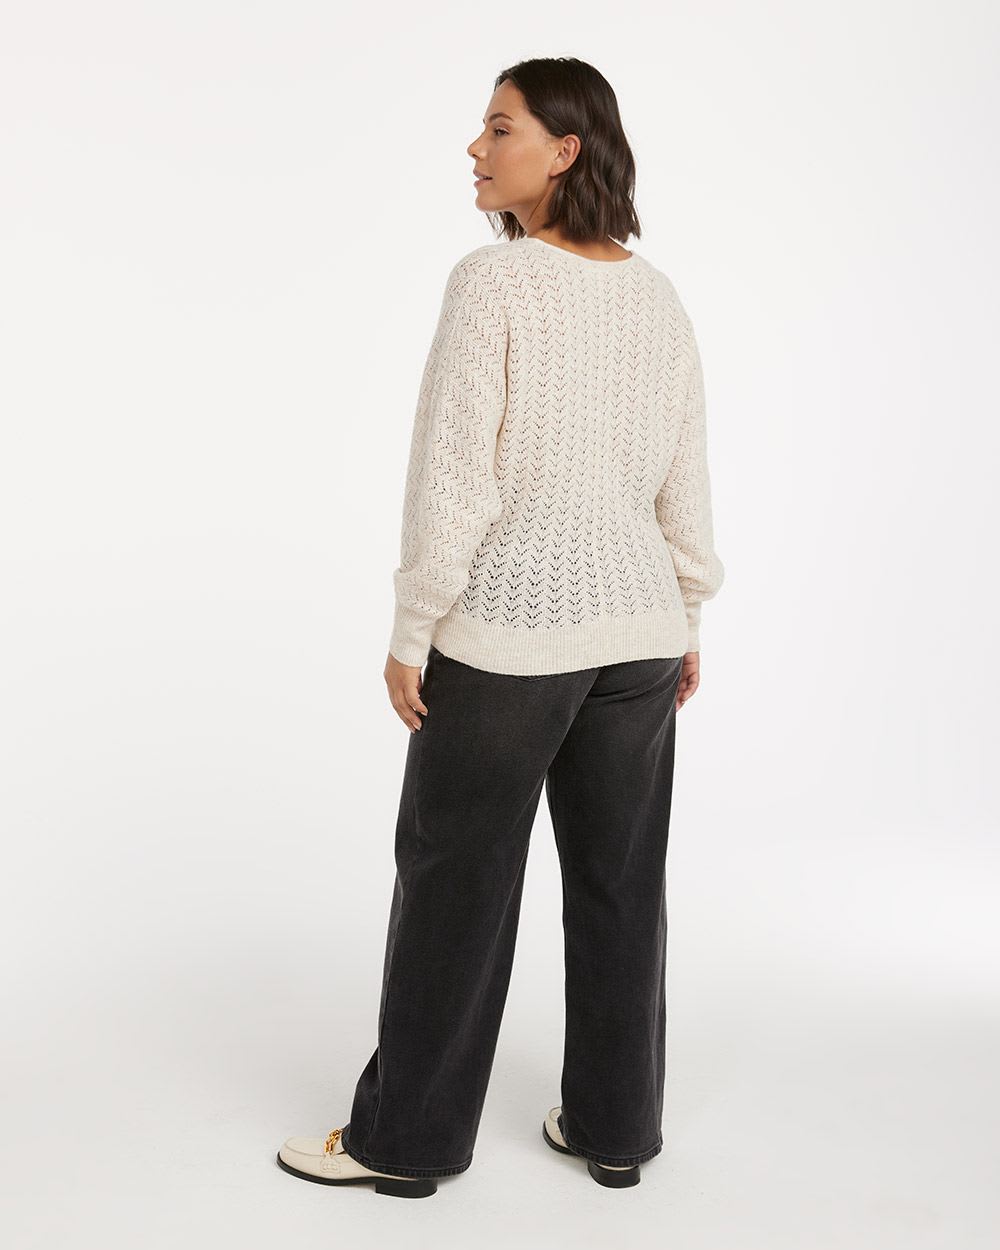 Long-Sleeve Wrap Pullover with Pointelle Stitches